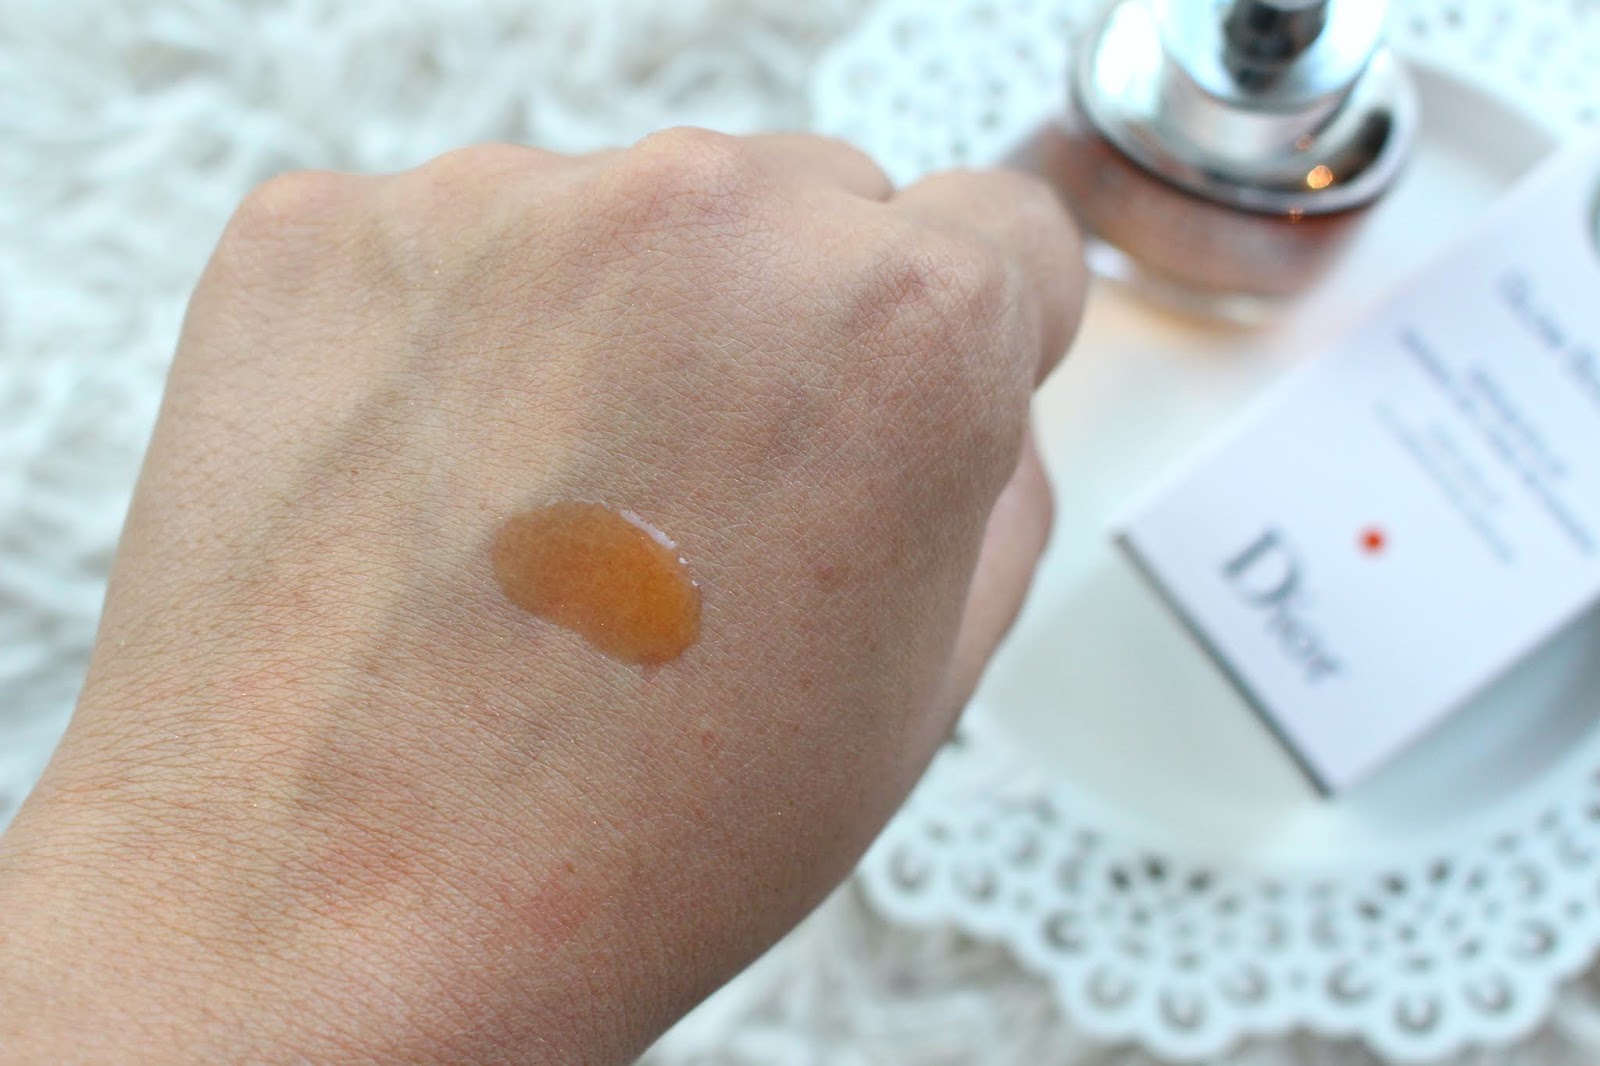 glow booster dior review